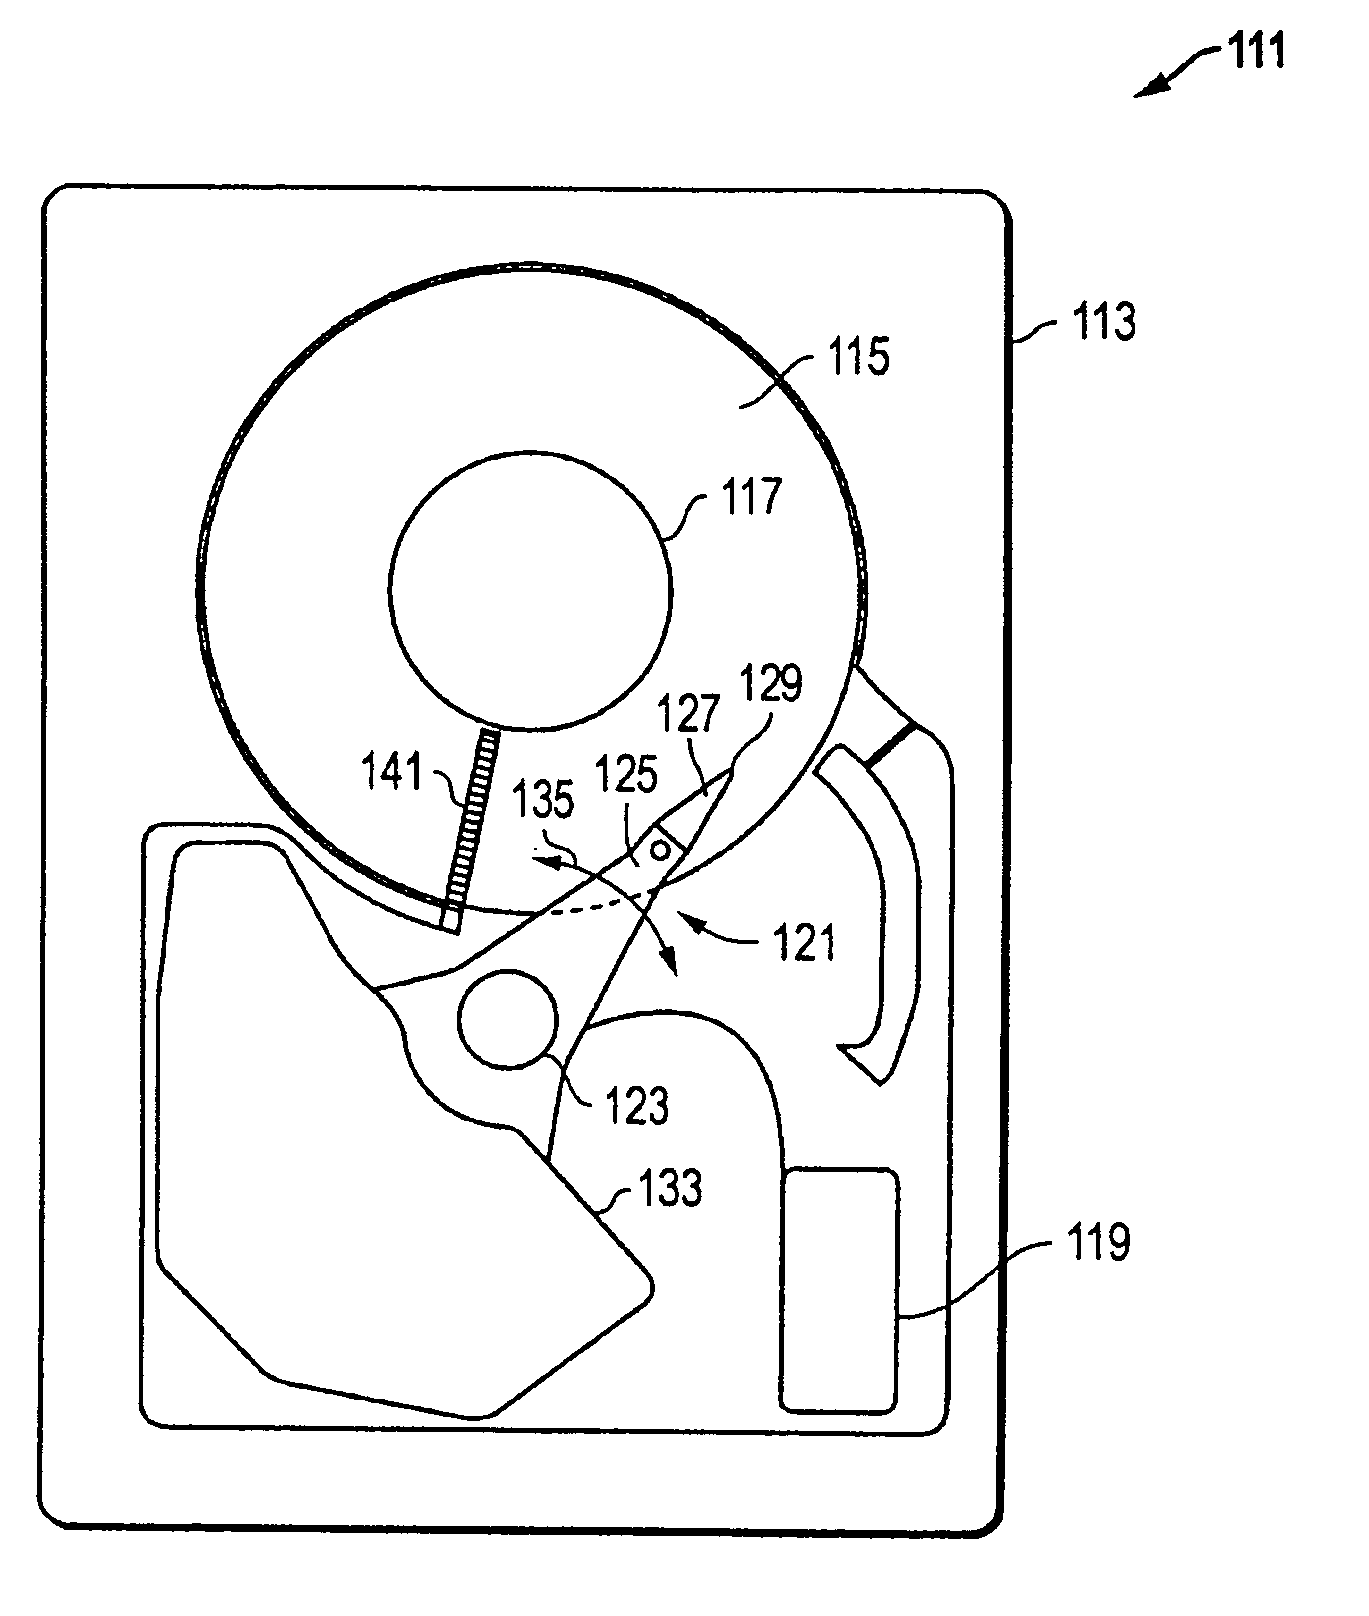 System, method, and apparatus for applying boundary layer manipulation techniques to the air flow inside rotary disk storage devices